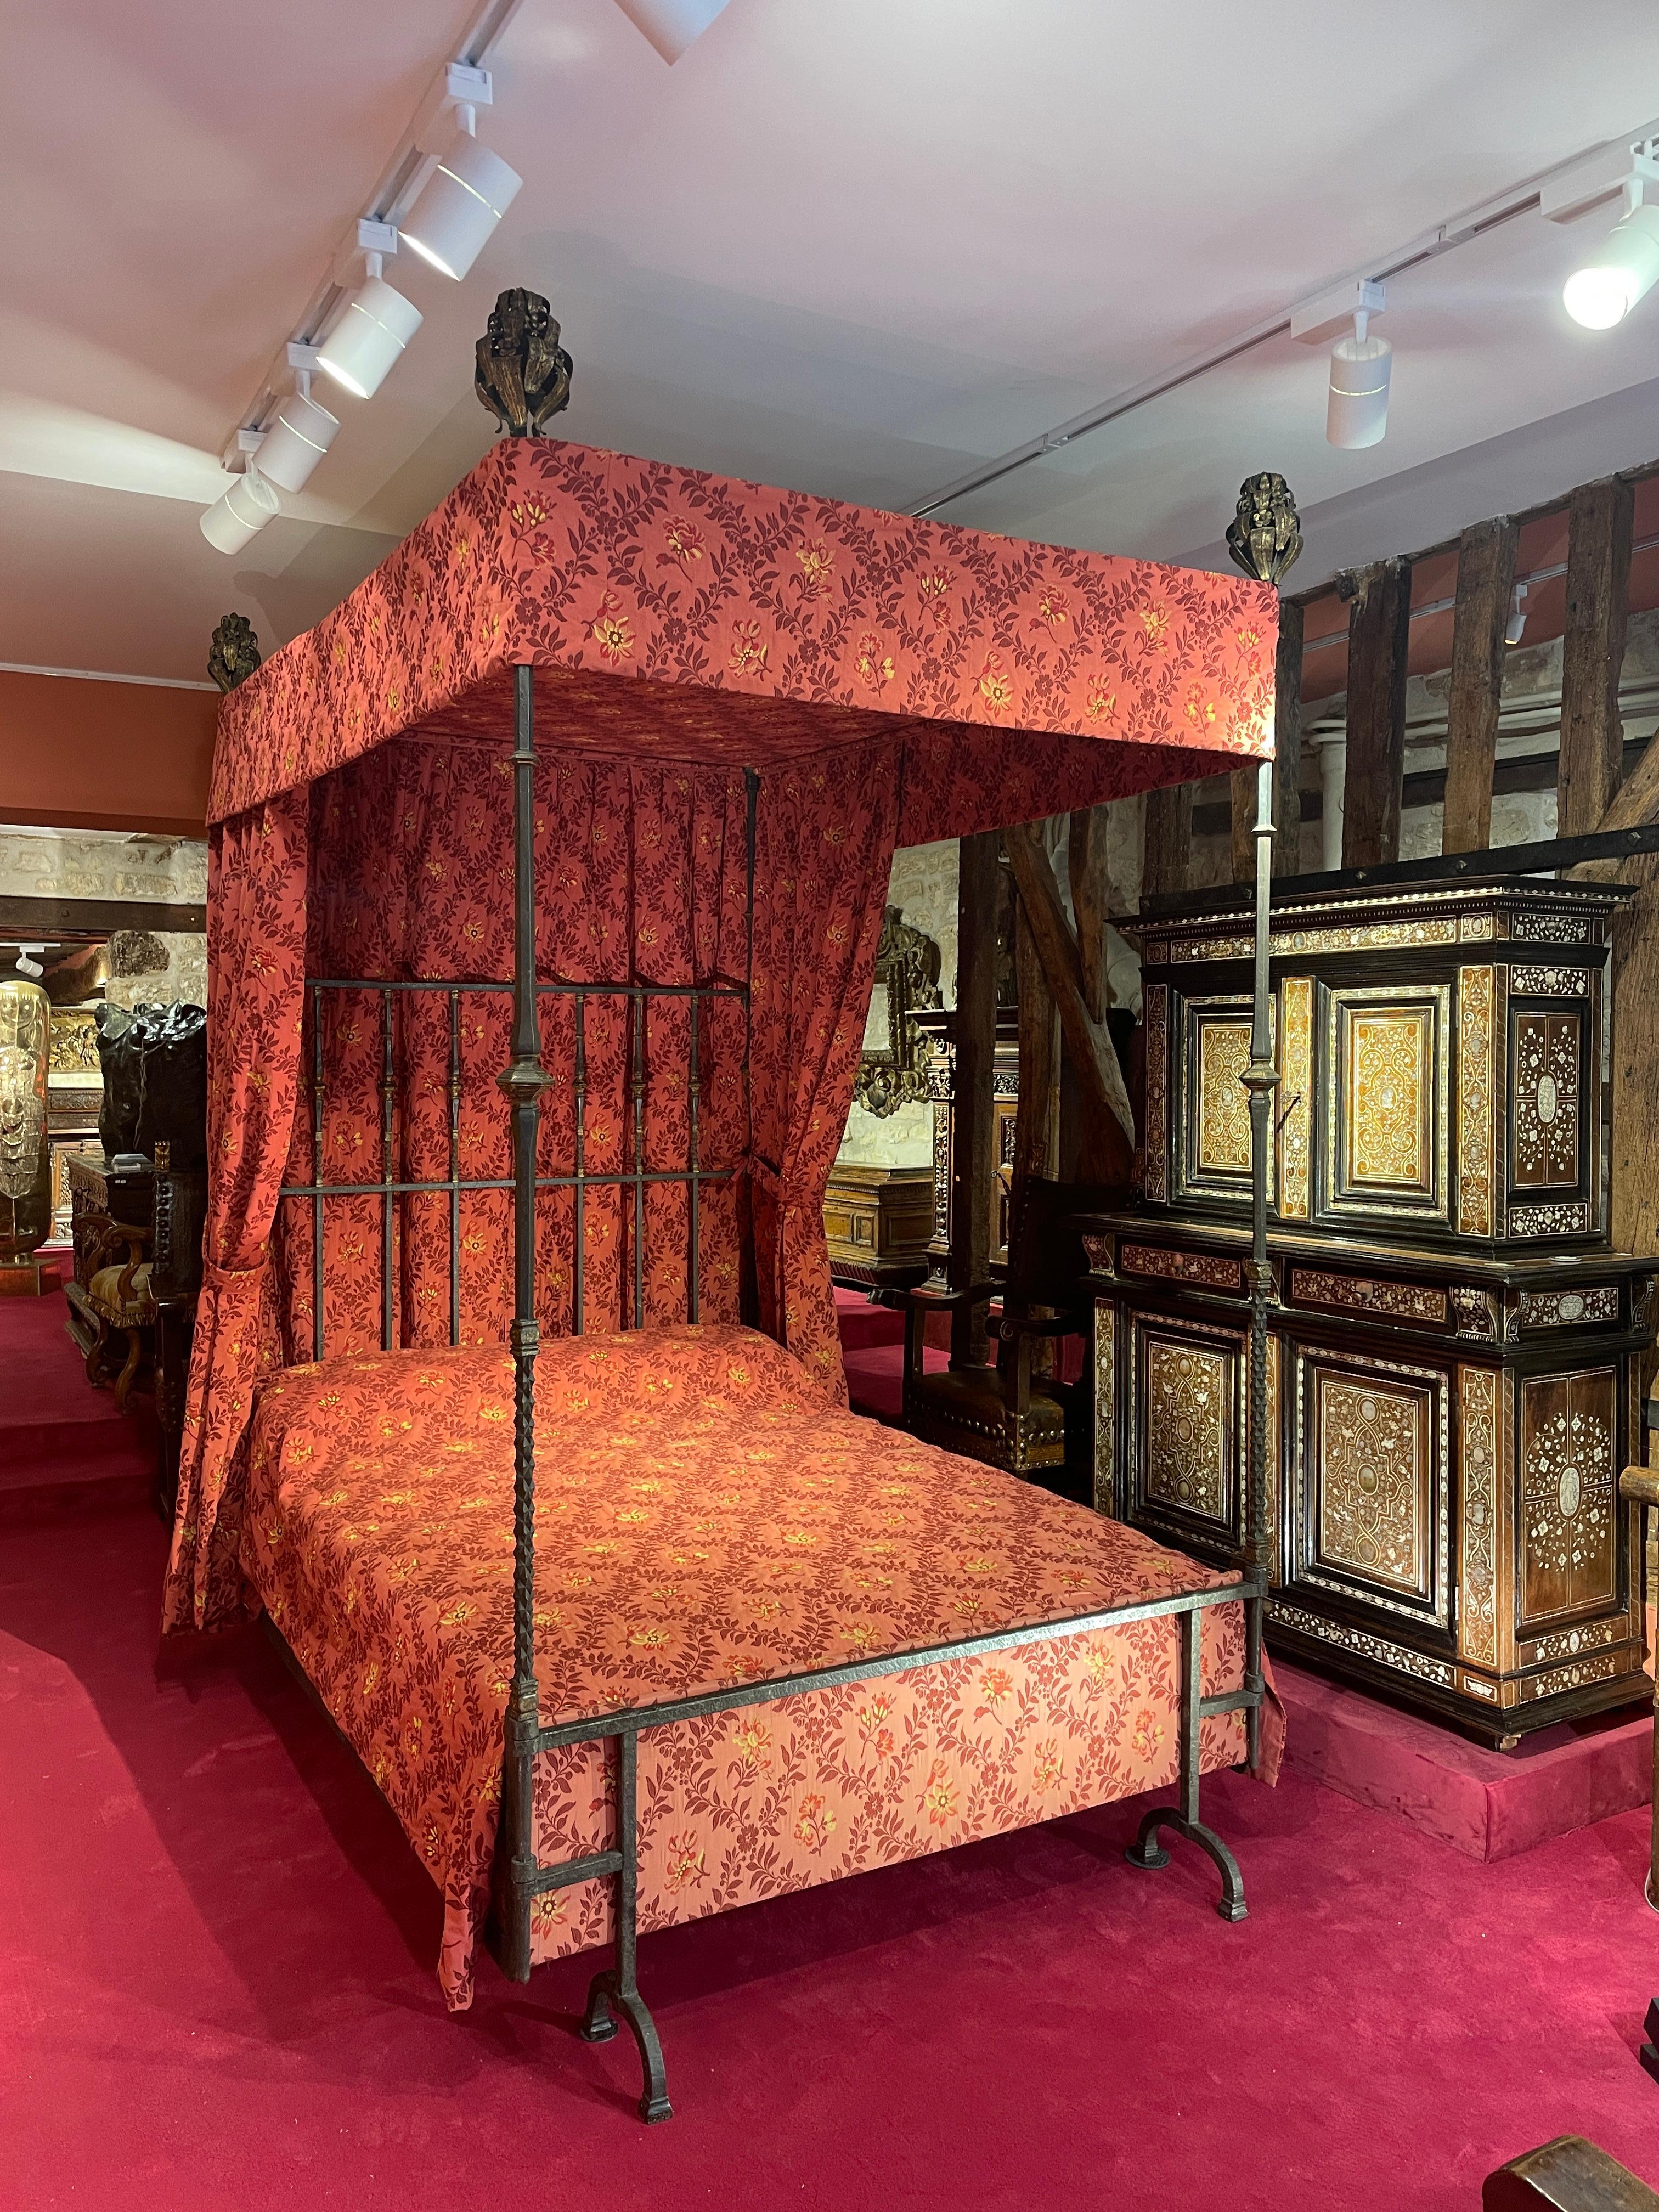 CANOPY BED IN HAMMERED AND GILDED WROUGHT IRON
 
ORIGIN: SPAIN
PERIOD: 16TH CENTURY
 
Height: 270 cm
Length: 152 cm
Depth: 240 cm
 
(Base: H. 206 cm; W. 148 cm)
 
Hammered and gilded wrought iron
Provenance : Galerie Etienne Lévy; Paris, 28 January